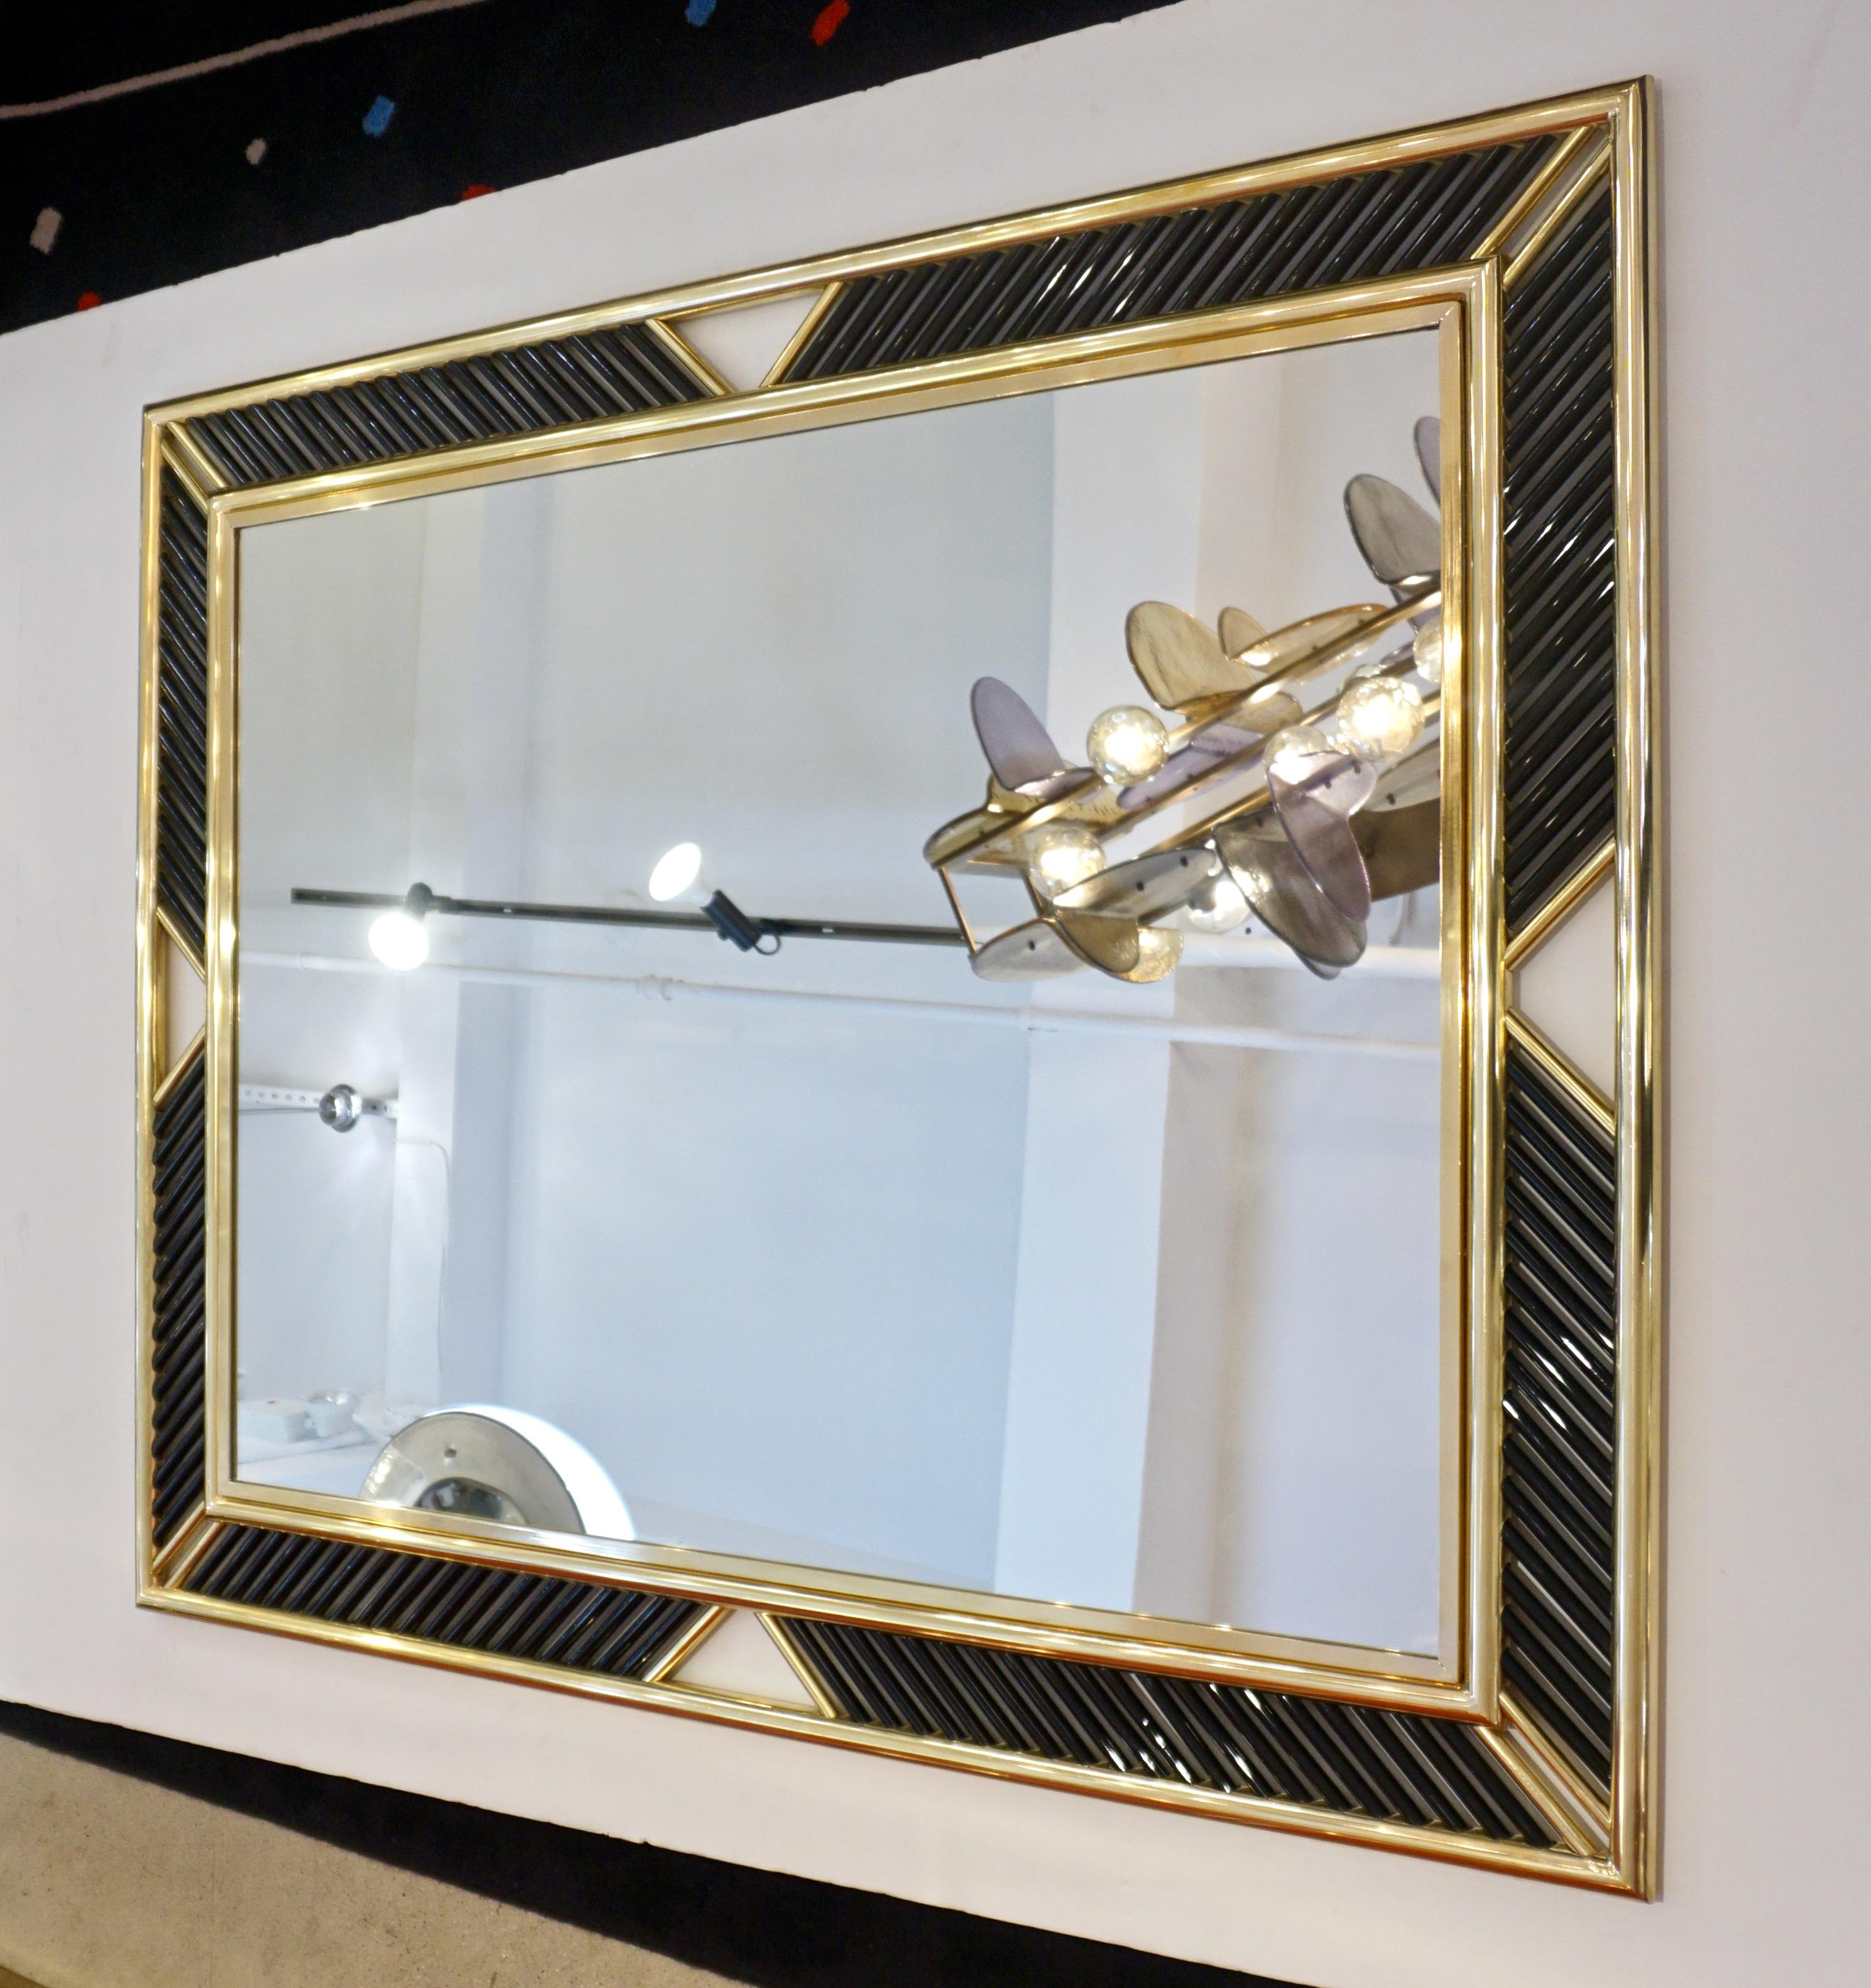 Hollywood Regency Design contemporary mirror, entirely handcrafted in Italy for Cosulich Interiors, with a modern double brass frame adorned with exquisite Murano glass rods in a solid black color that can be customized. The craftsmanship is of high